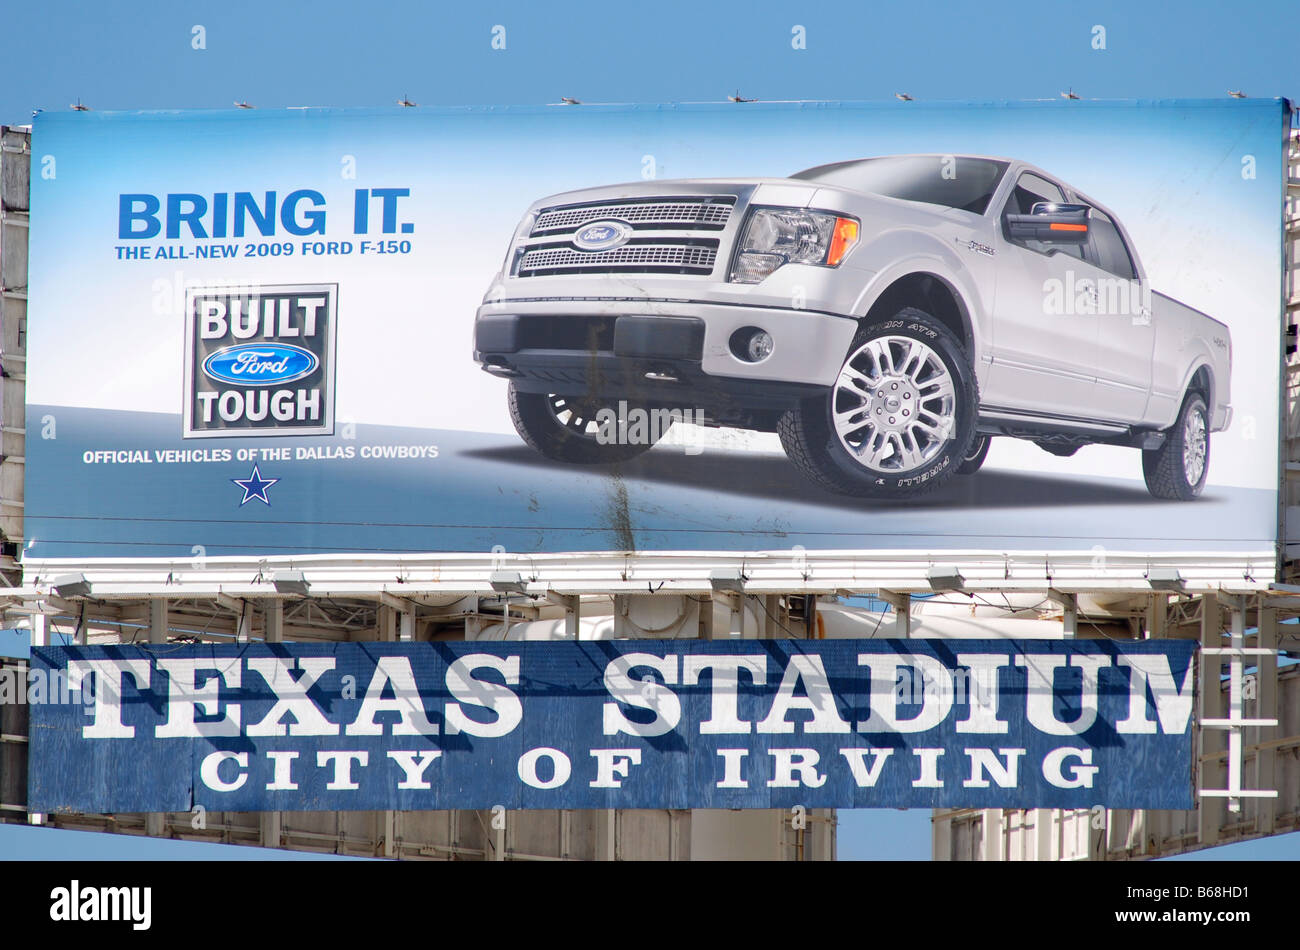 Ford advertisement on a billboard at Texas Stadium in Irving, Texas Stock Photo